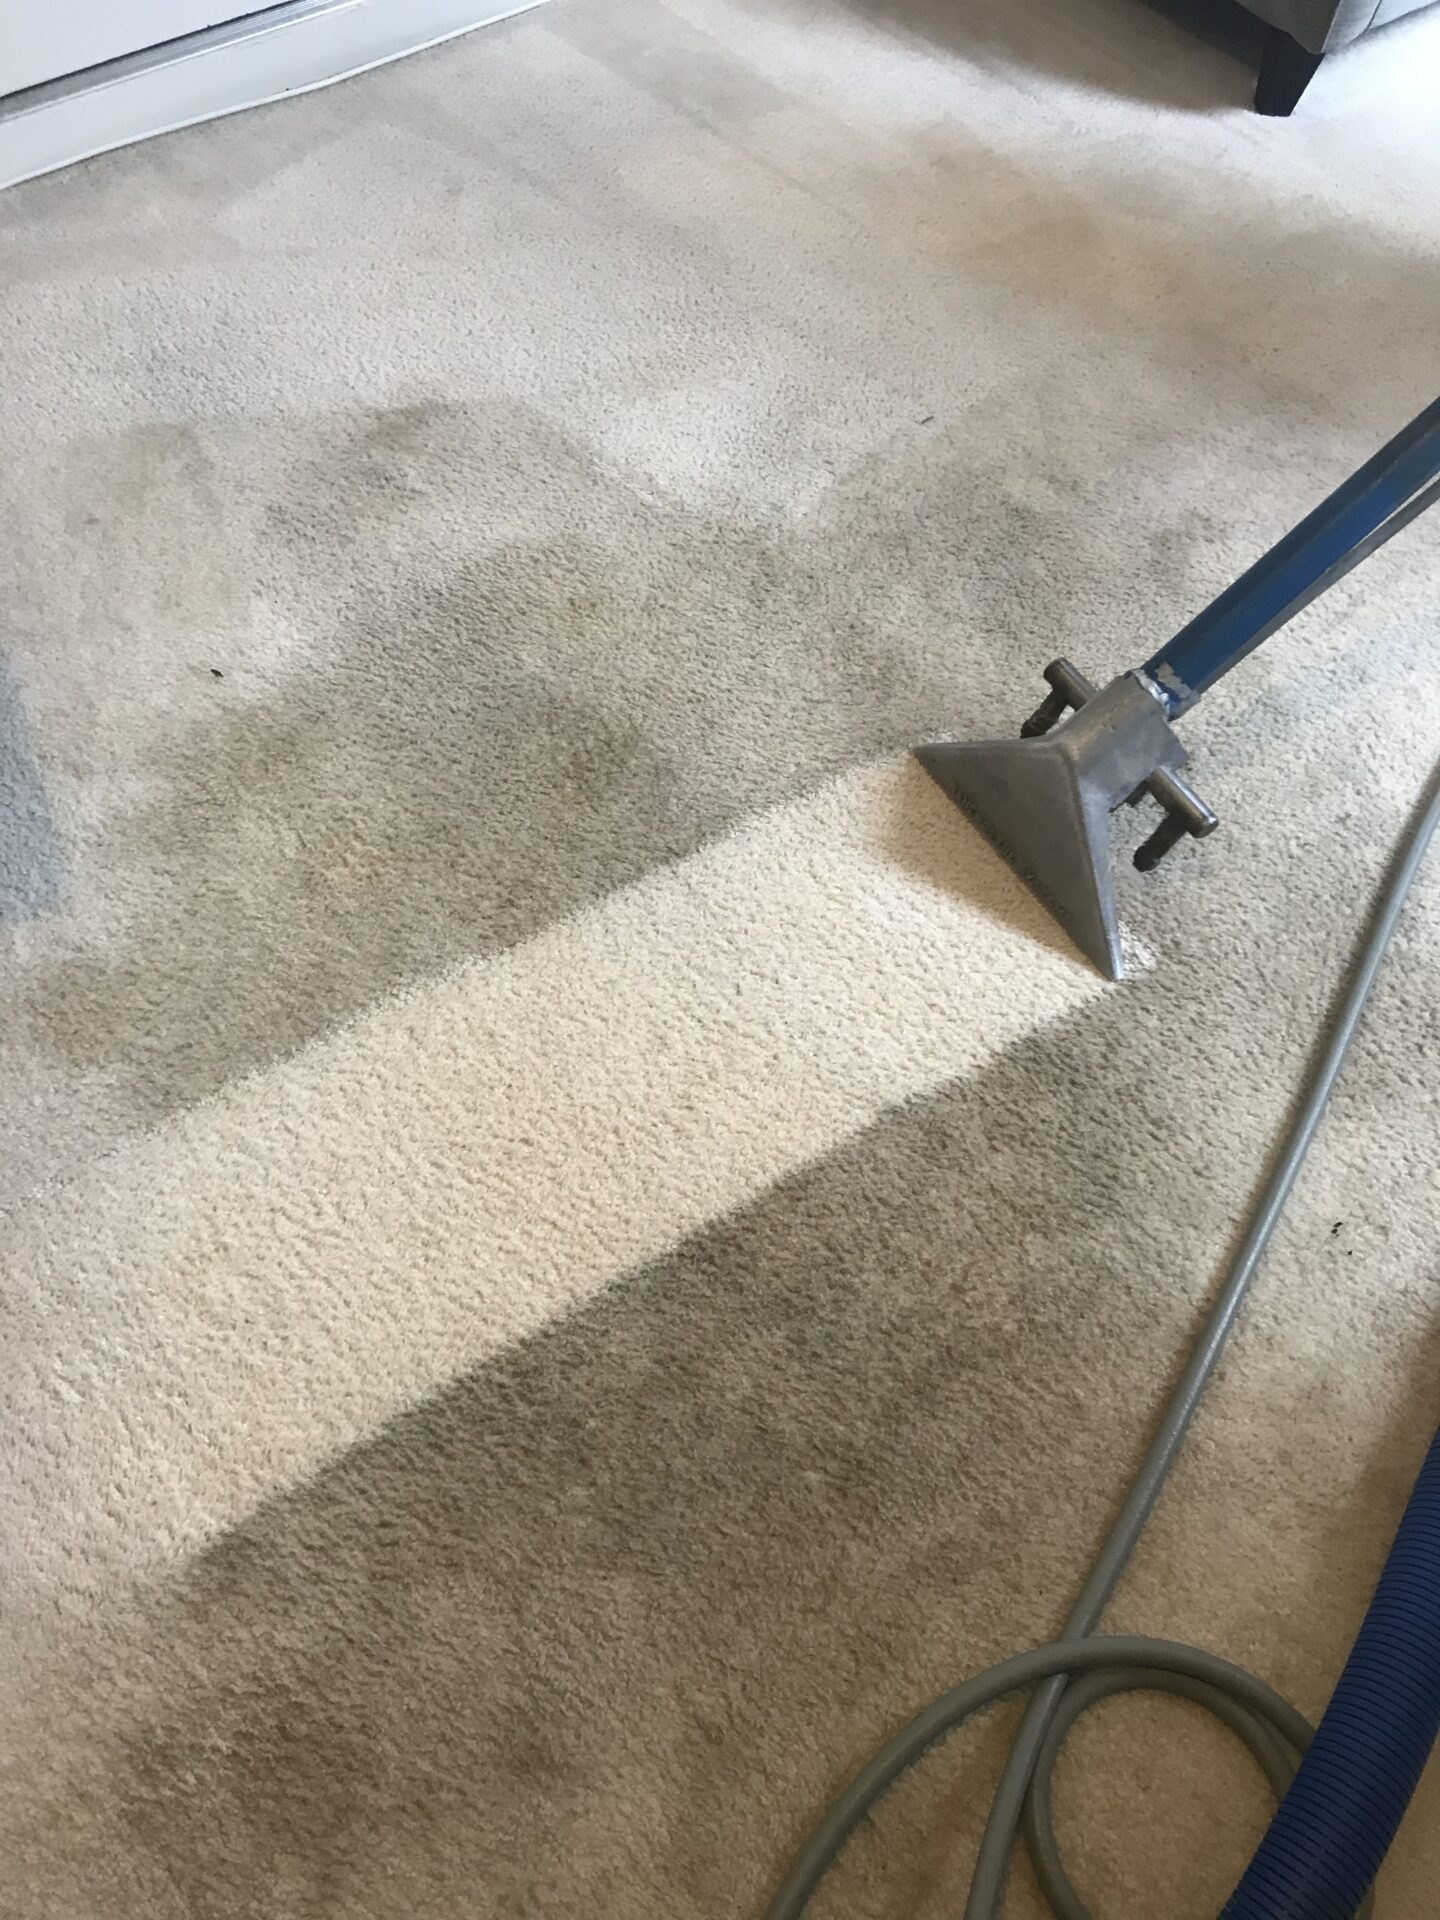 A closeup look at the vacuum cleaner cleaning the floor